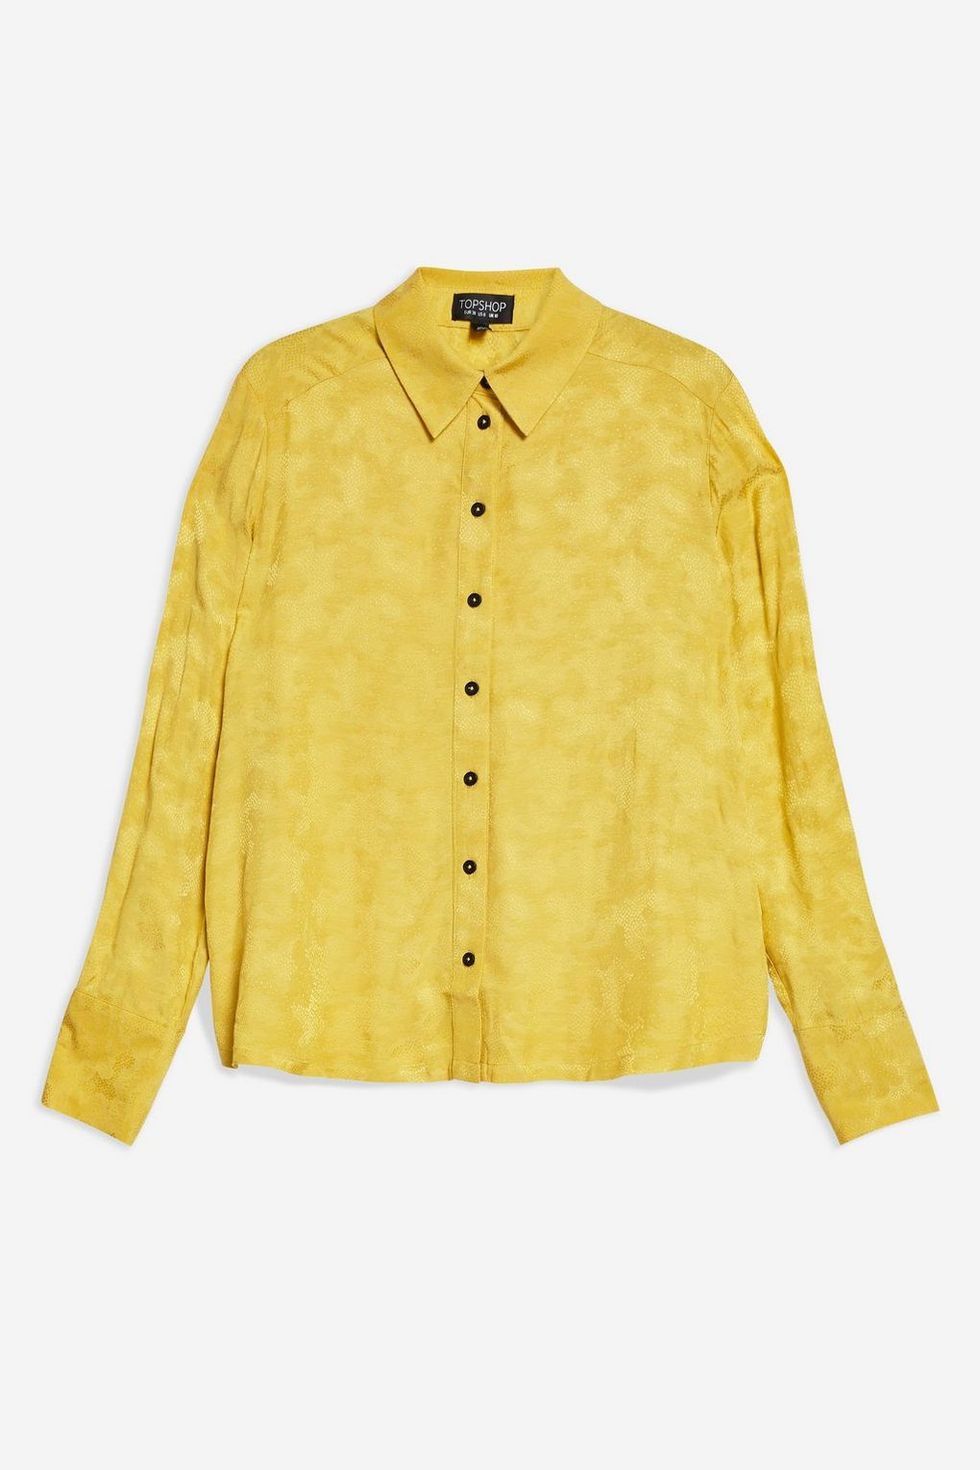 Clothing, Yellow, Sleeve, Outerwear, Button, Collar, Blouse, Beige, Top, Shirt, 